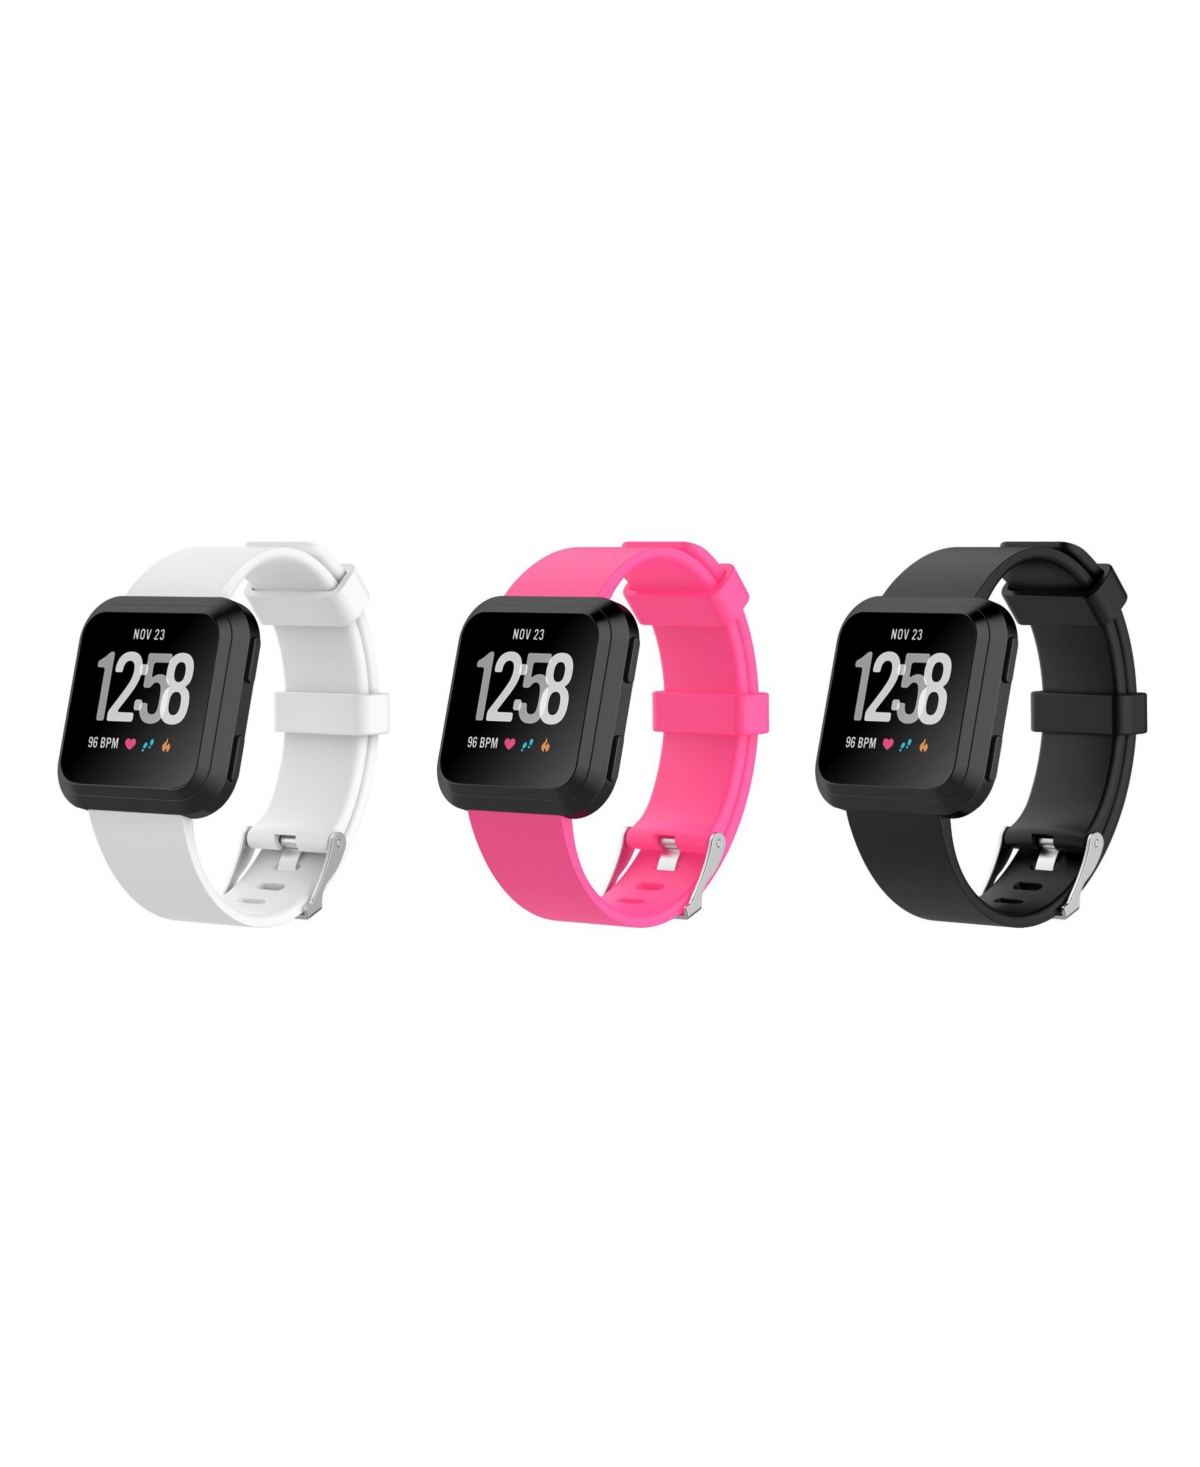 Unisex Fitbit Versa Assorted Silicone Watch Replacement Bands - Pack of 3 - Multi